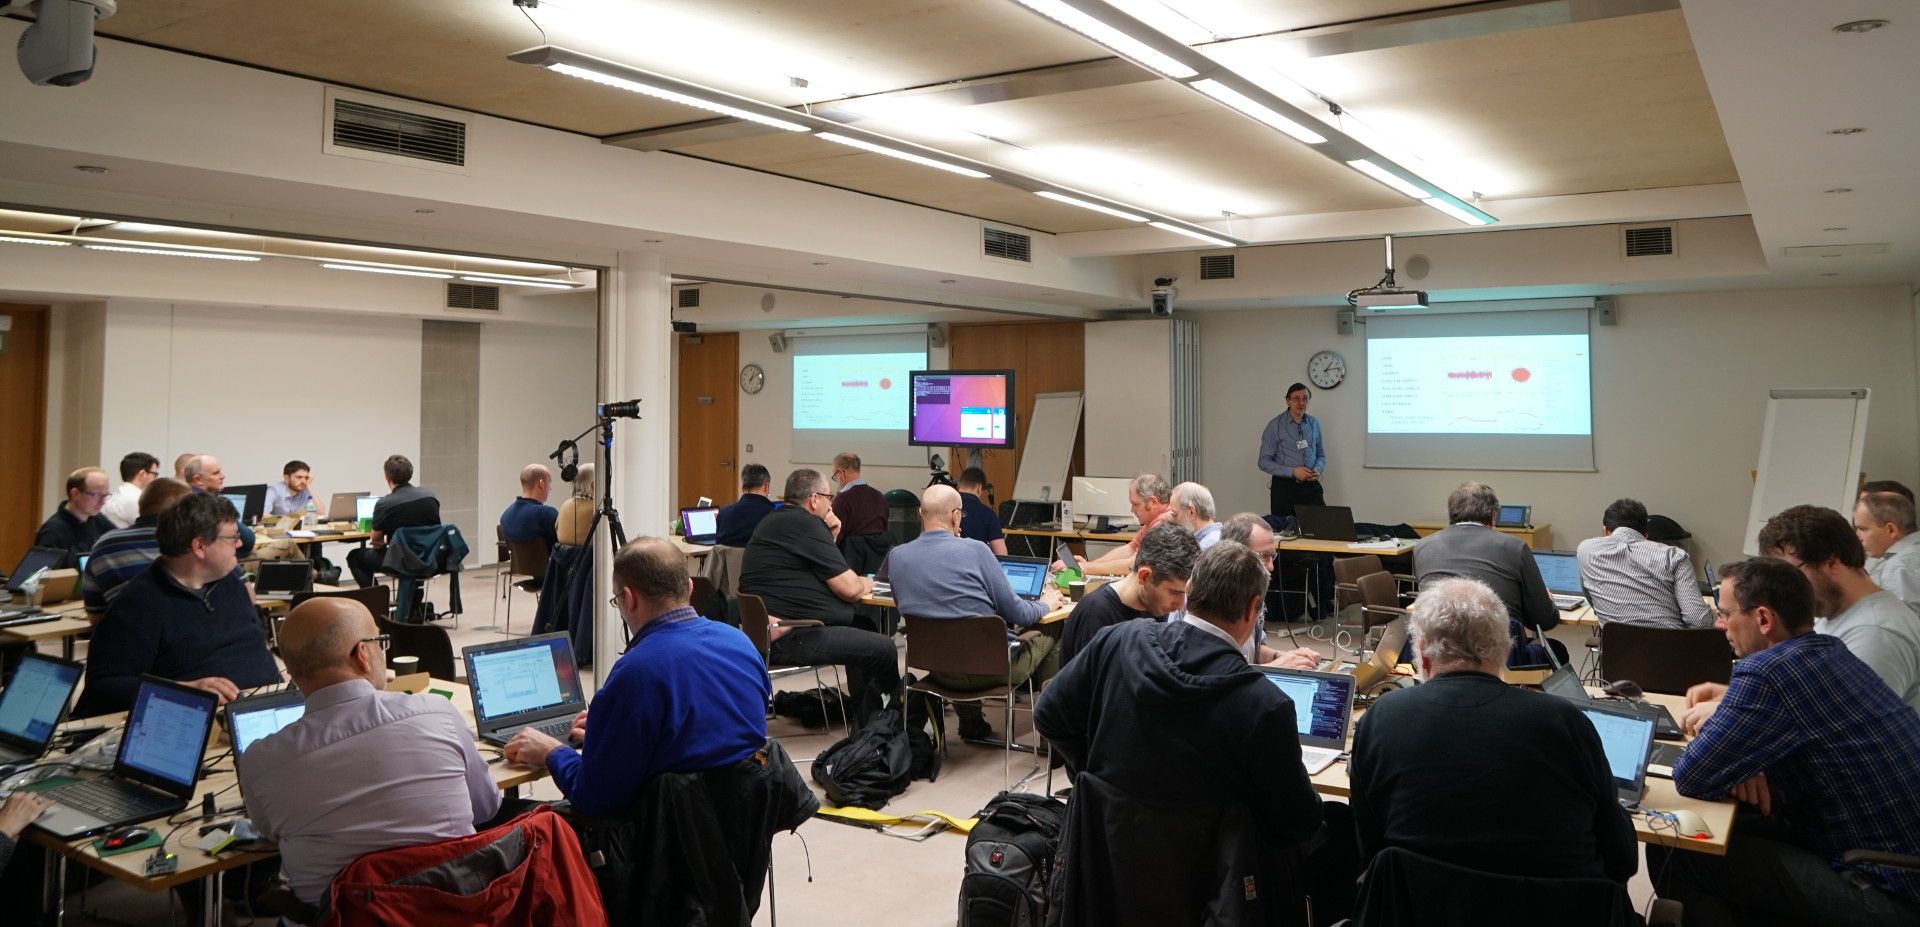 Introduction to software-defined radio with LimeSDR workshop, OSHUG #56.